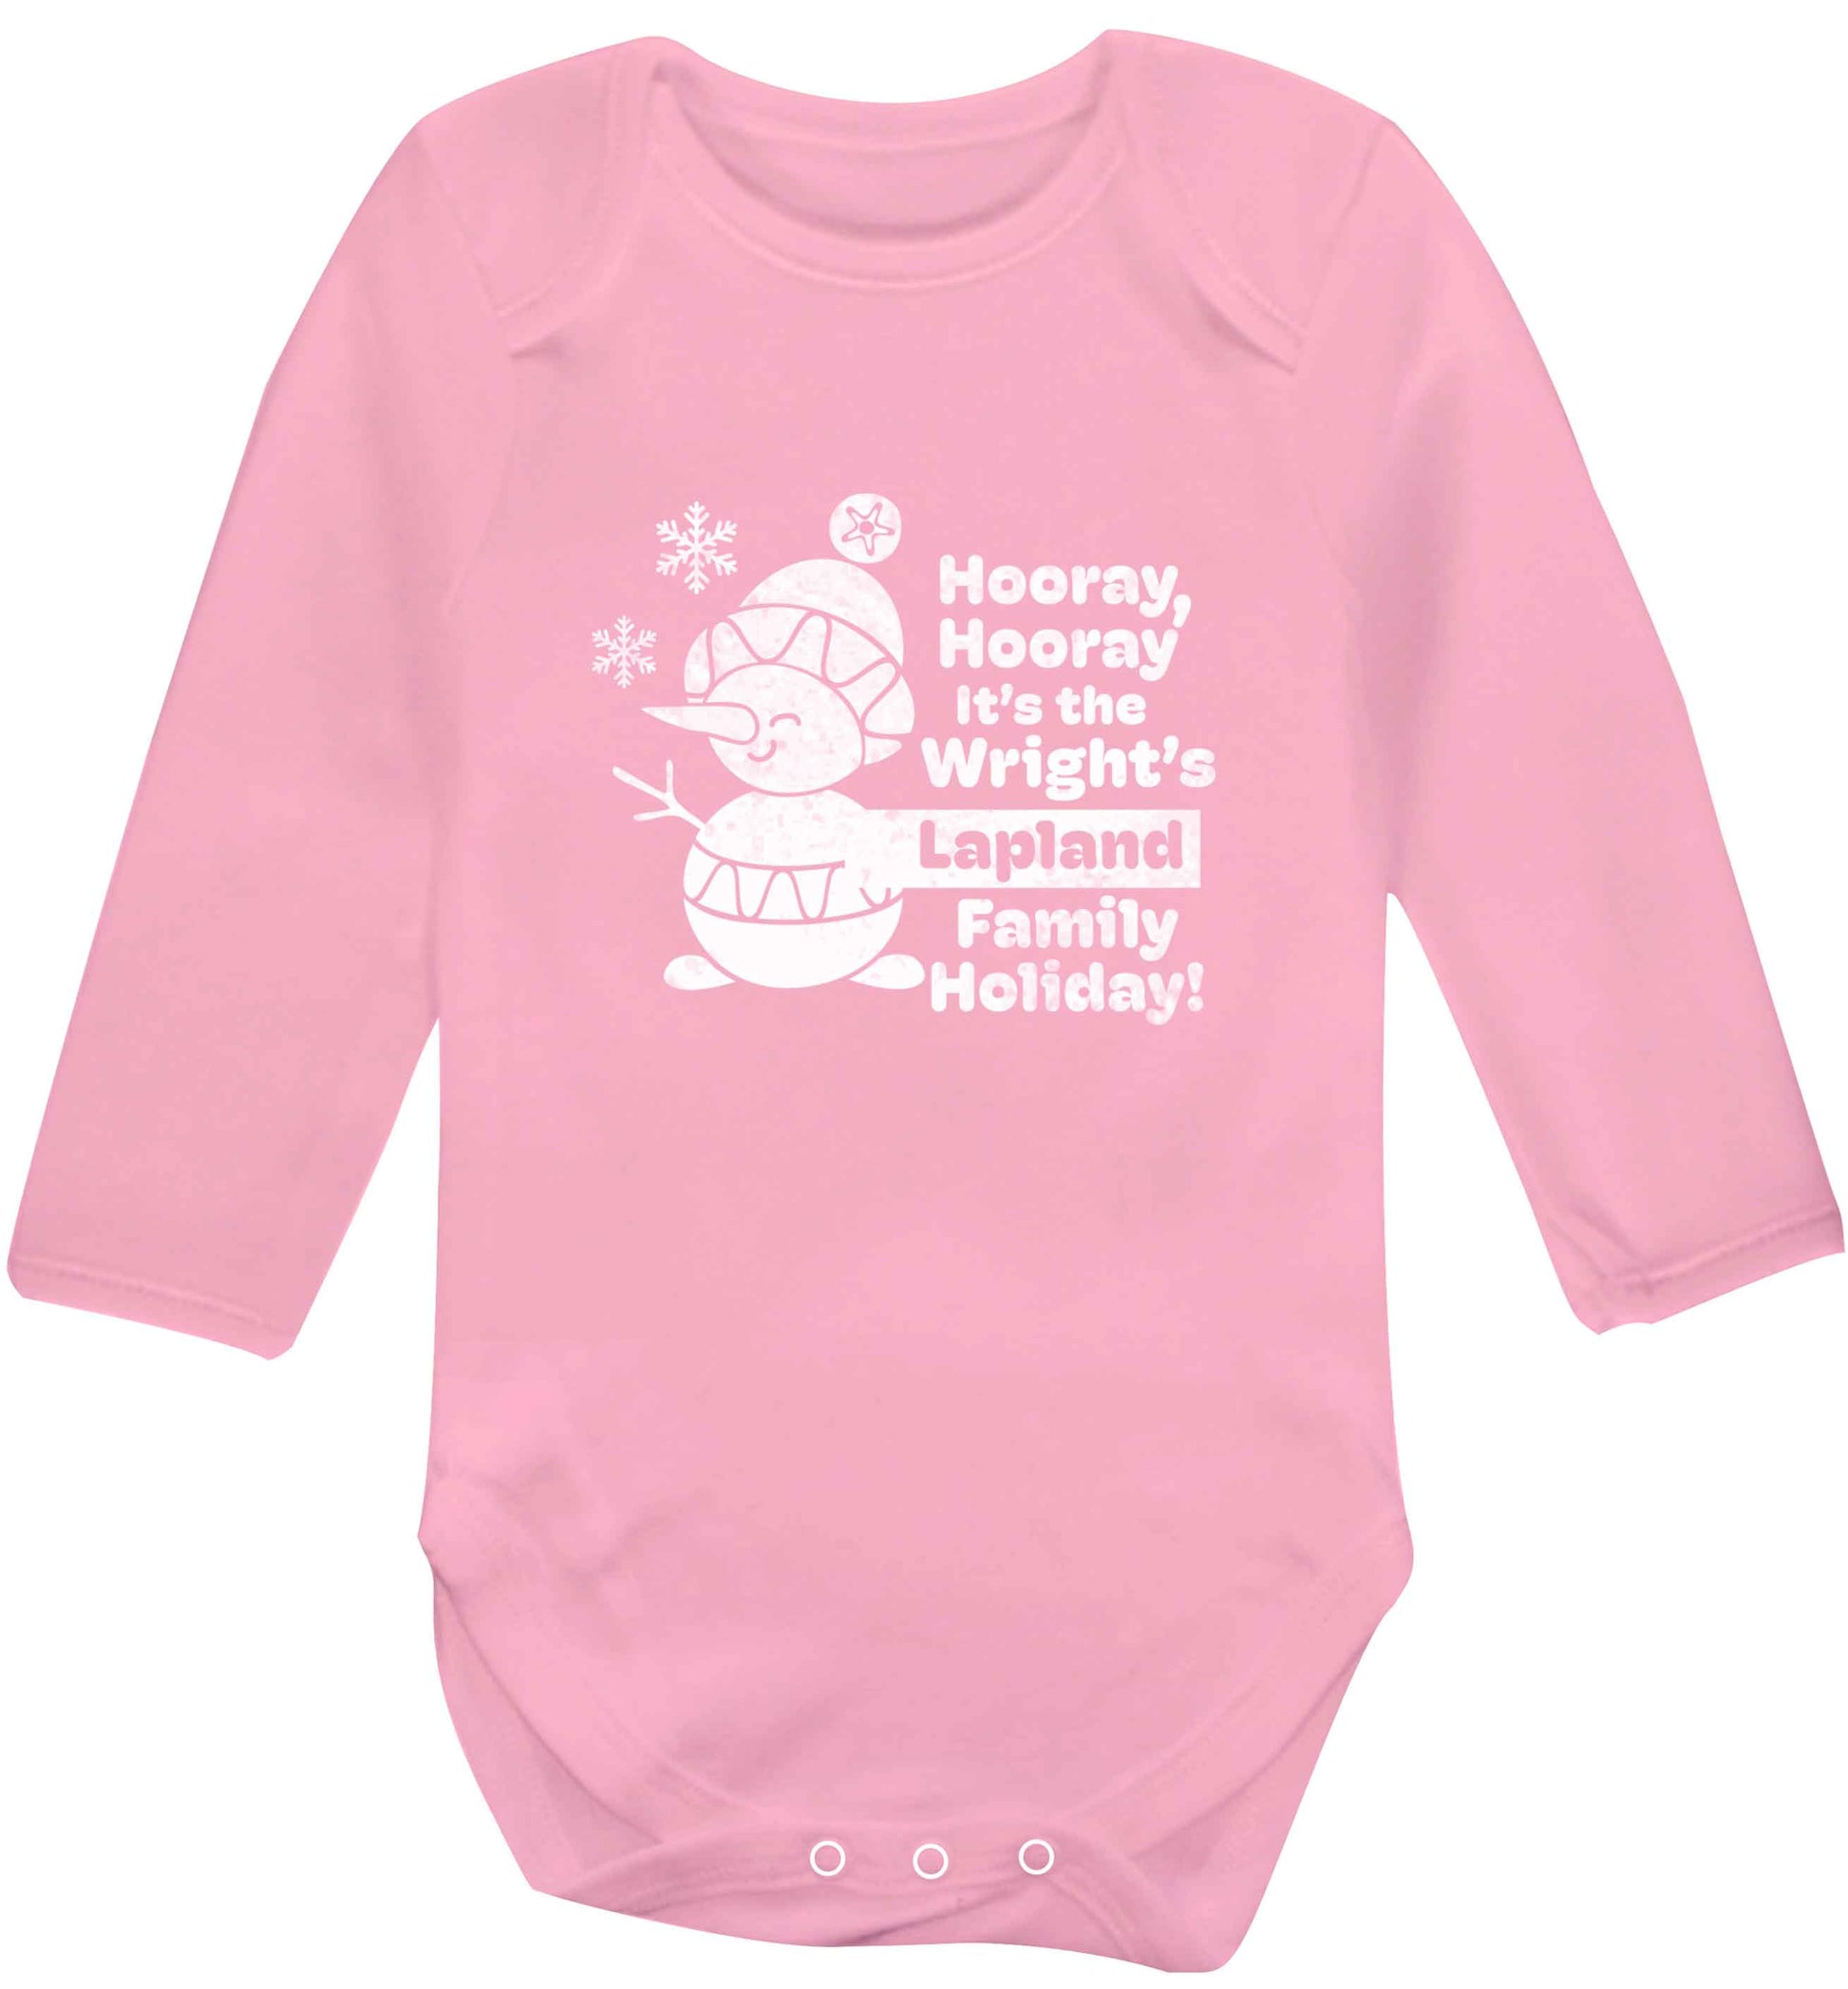 Hooray it's the personalised Lapland holiday! baby vest long sleeved pale pink 6-12 months